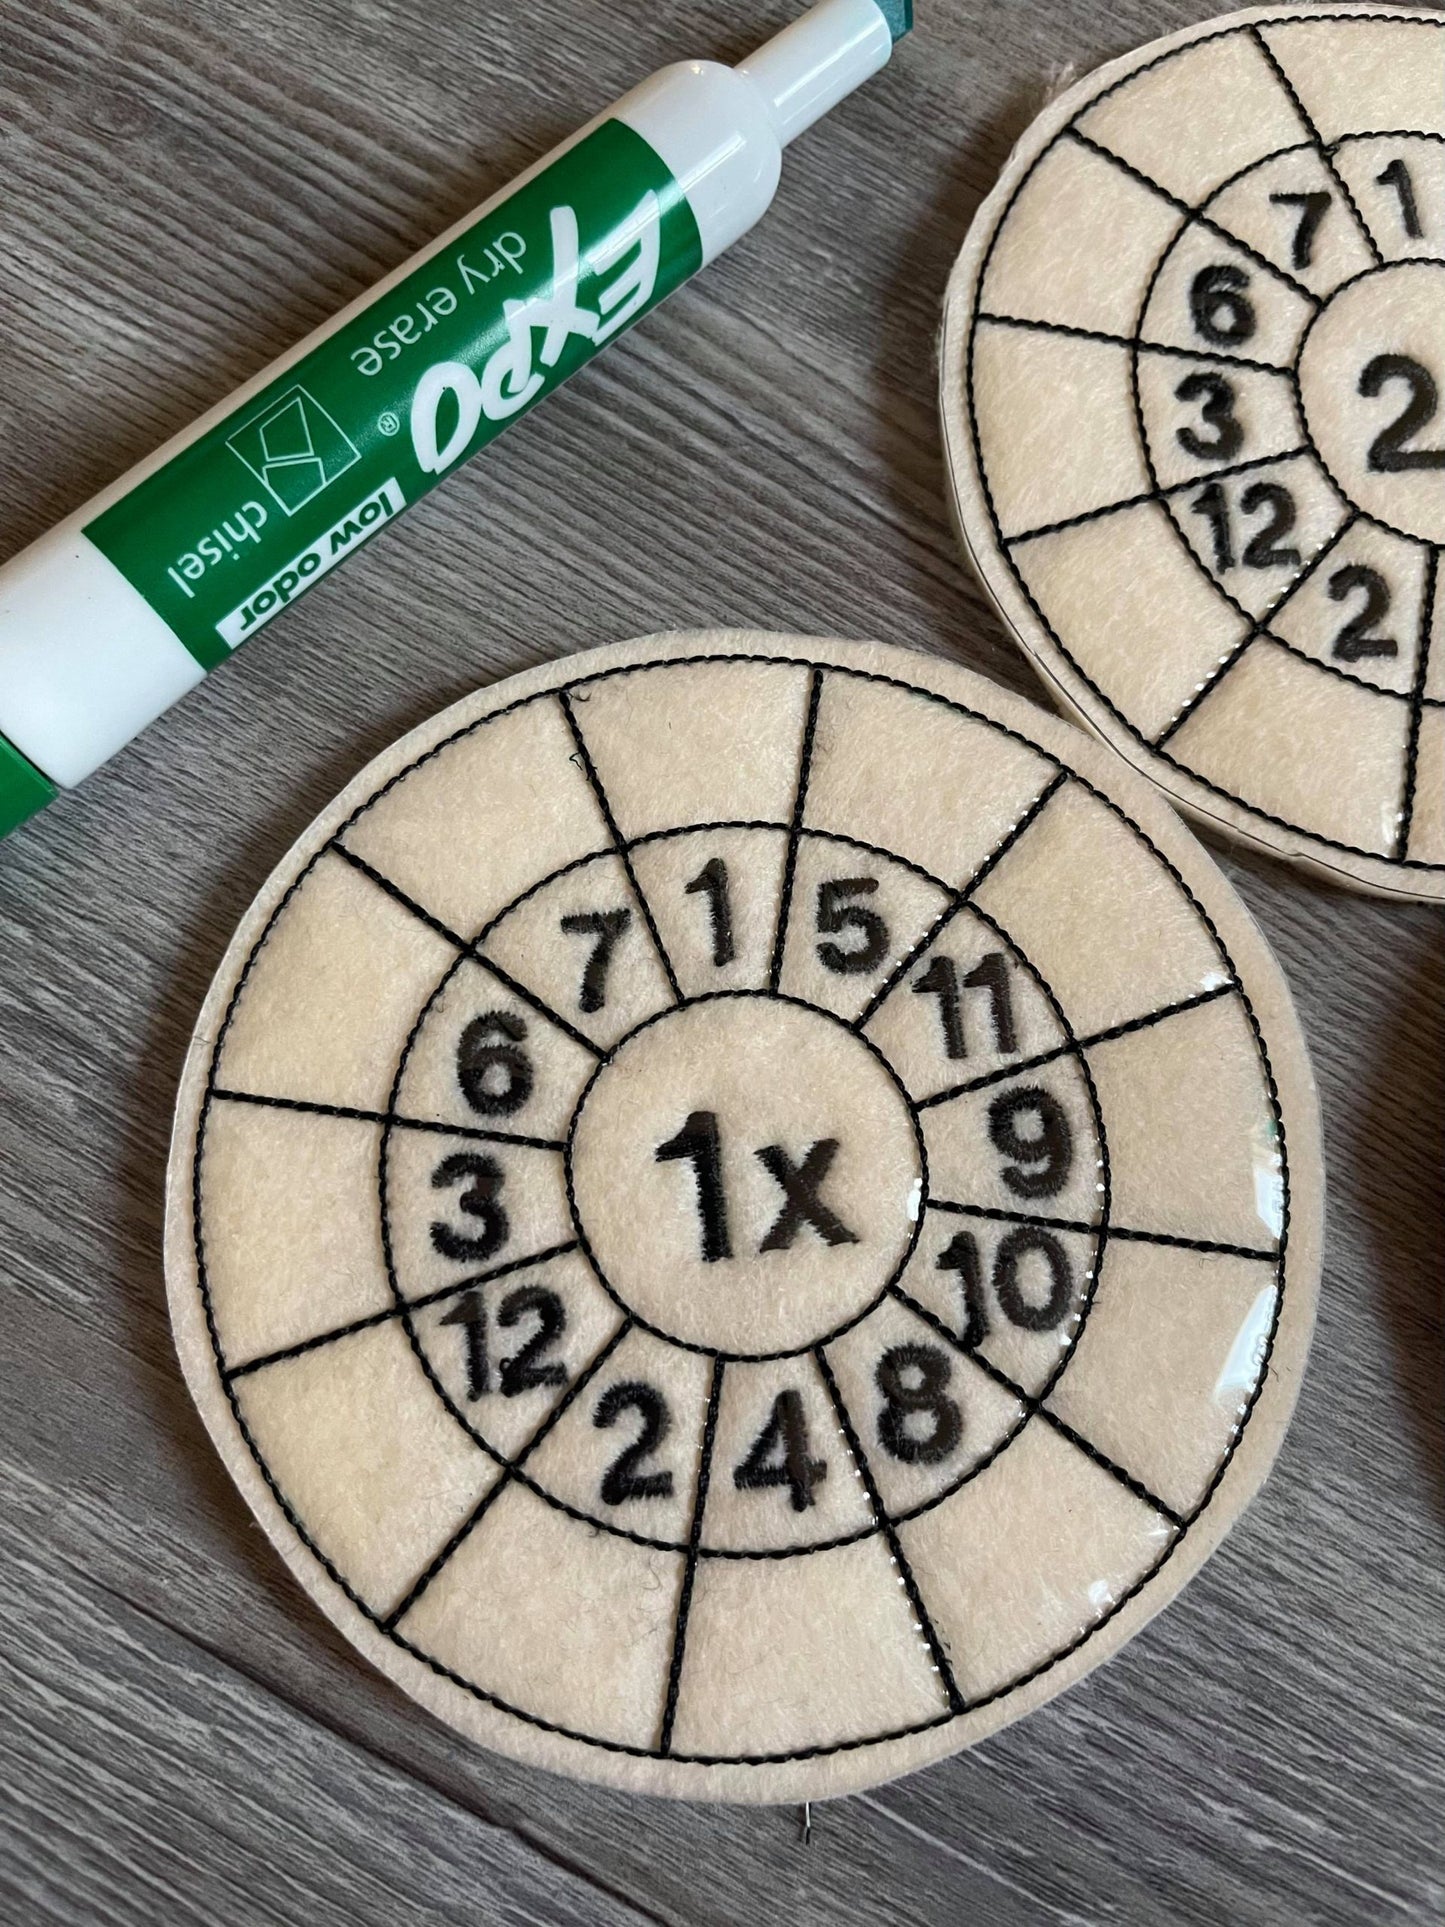 Multiplication Madness Set with zipper bag - Digital Embroidery Design